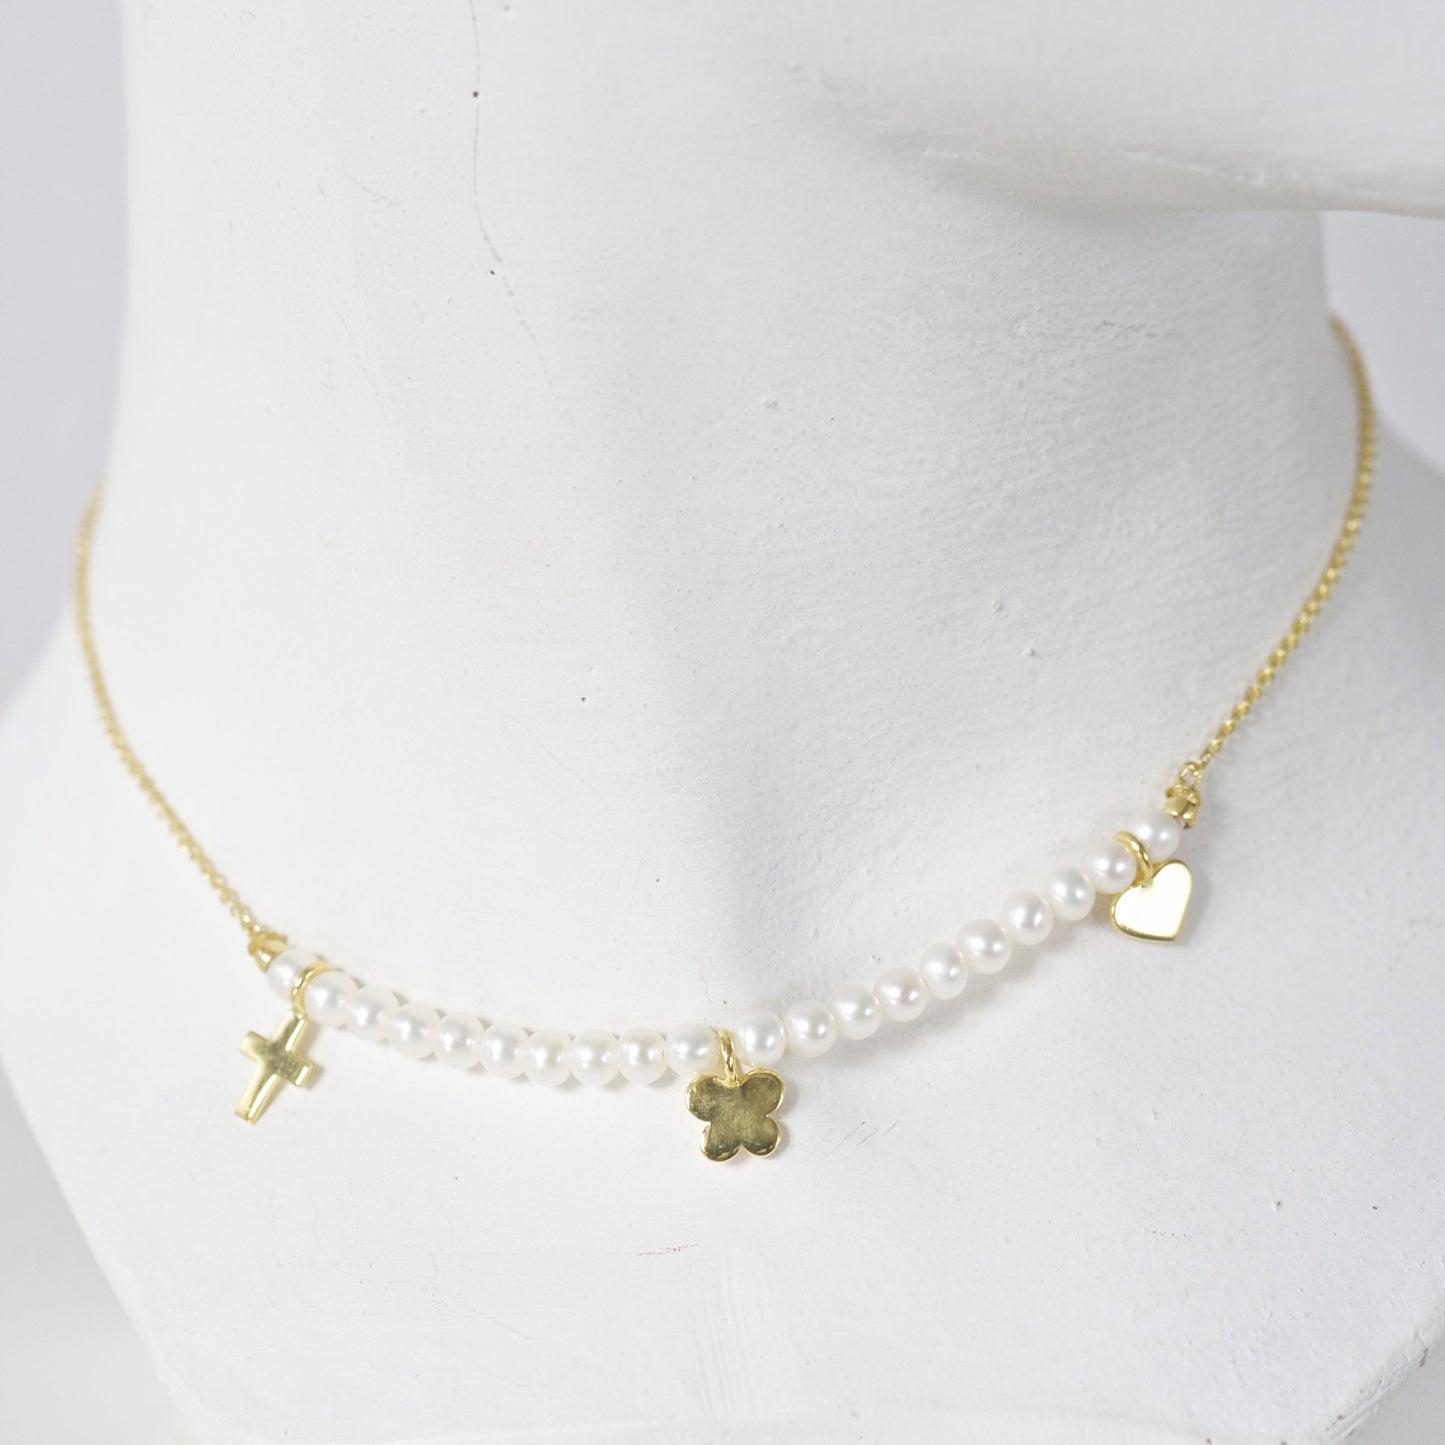 CHARM & PEARL NECKLACE